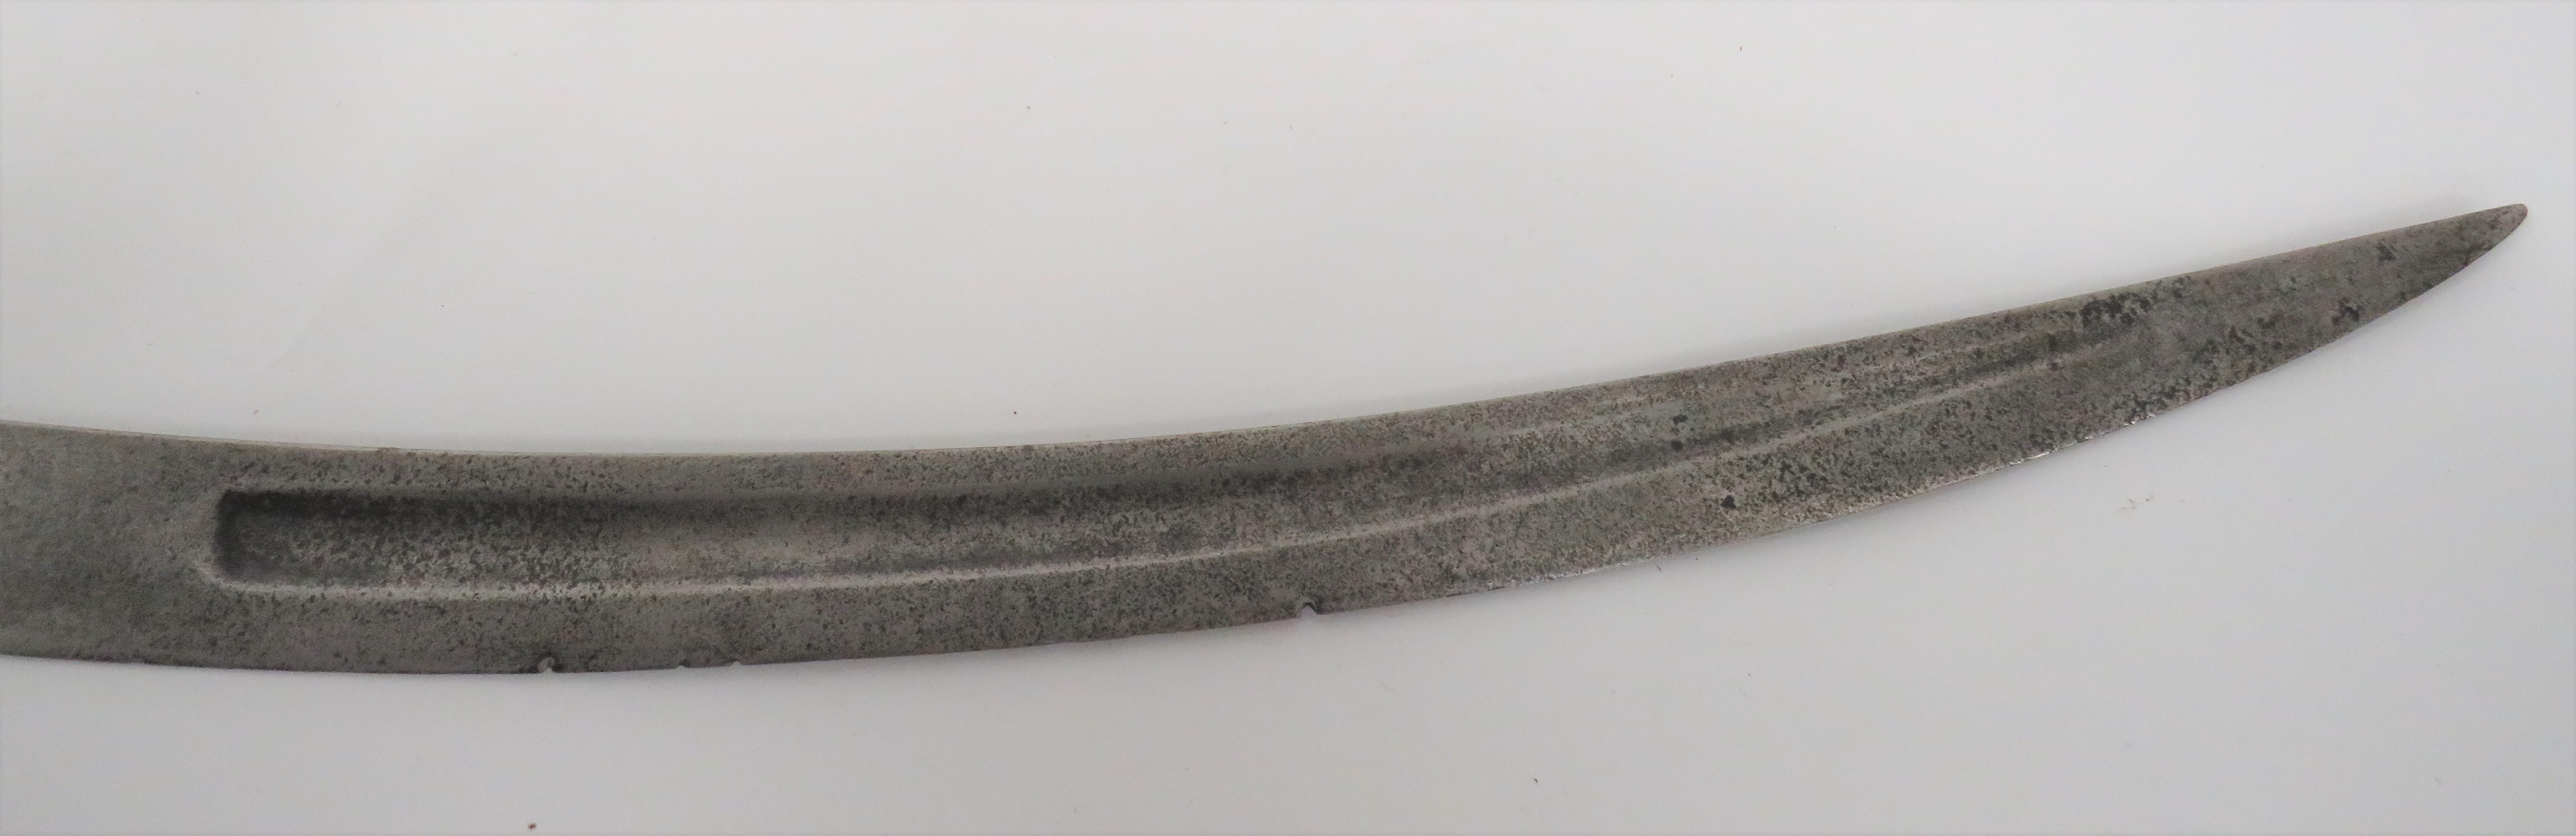 Late 18th Century Persian Shamshir  34 1/4 inch, single edged, heavily curved blade.  The point with - Image 3 of 3